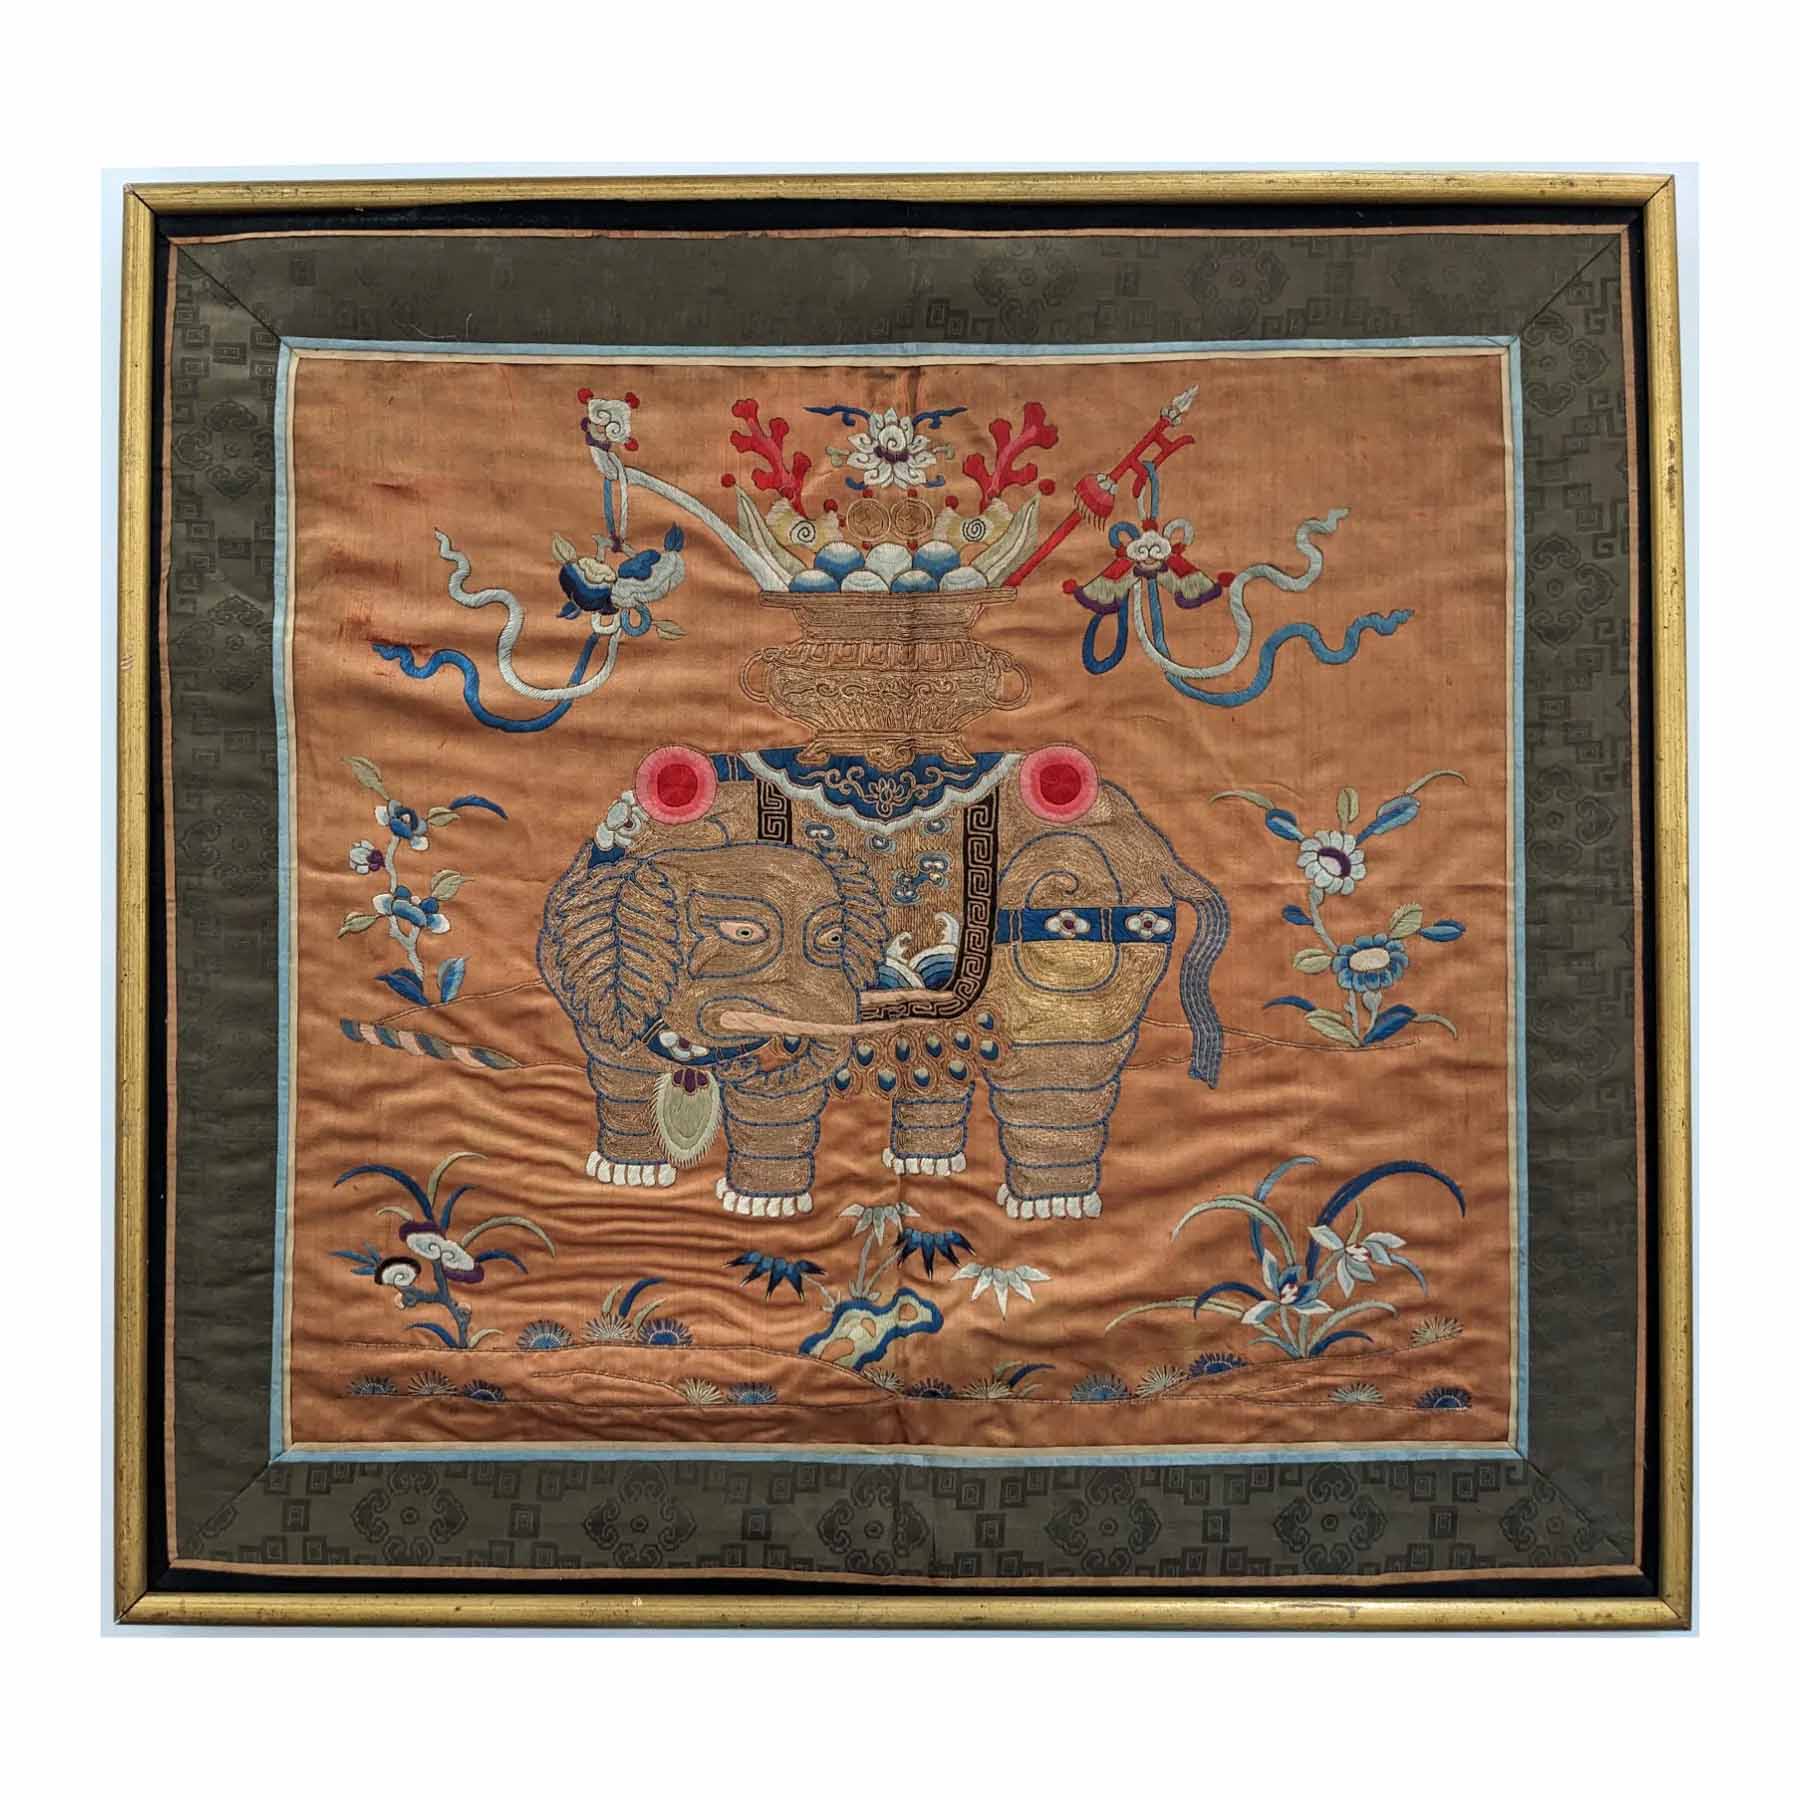 Asian antique decorative arts, weaponry, sculptures and more come to Jasper52 June 18